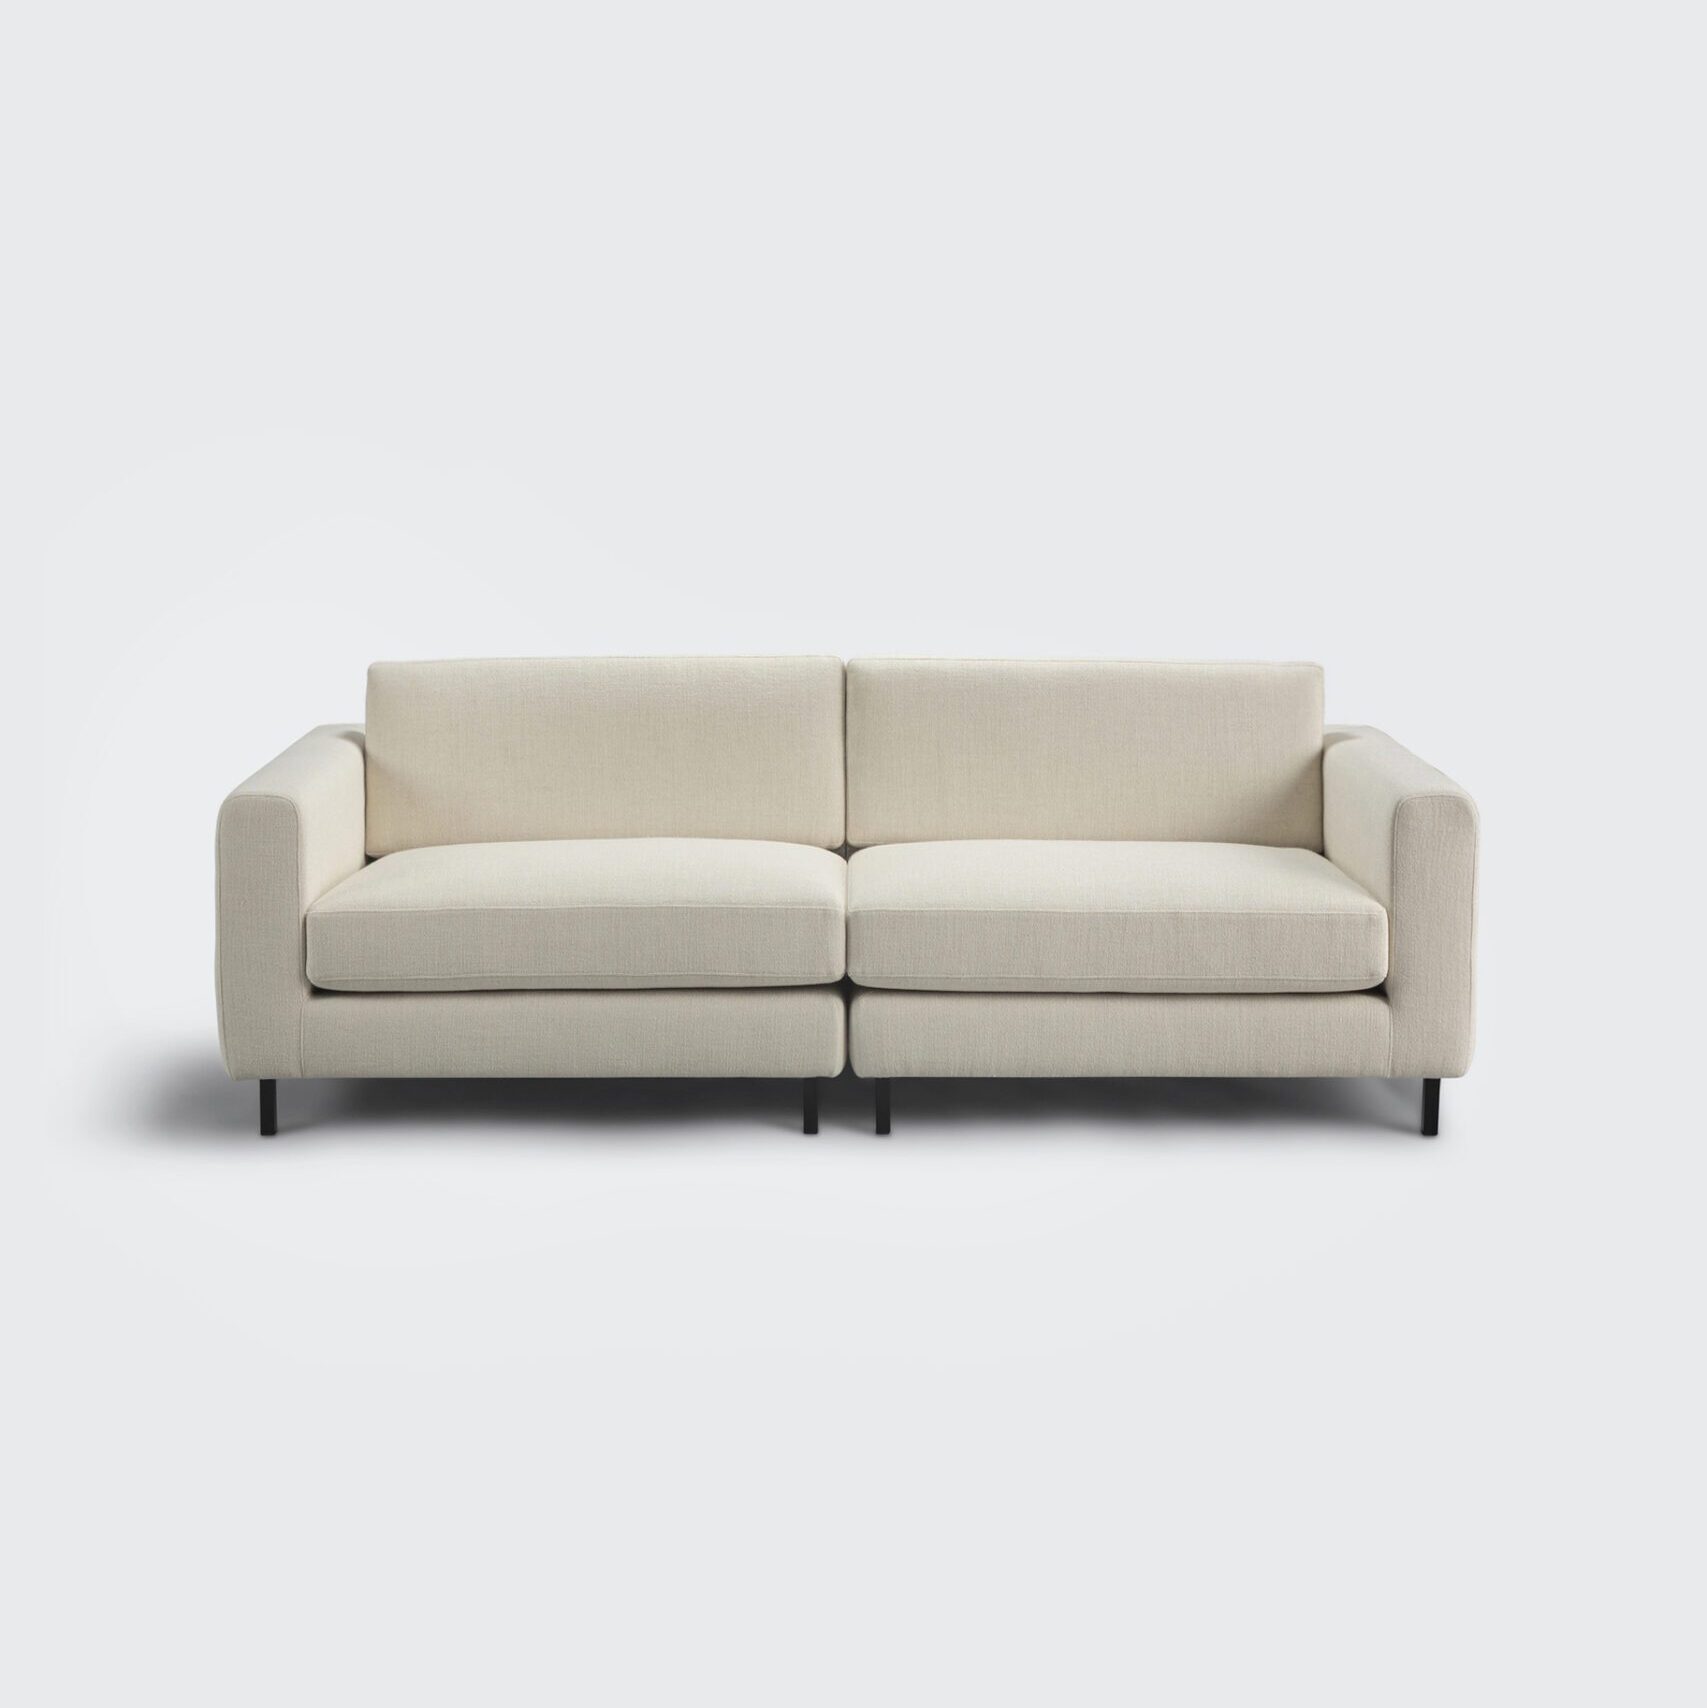 SAV sofa timeless 220 cream interior design architecture product furniture luxury_resistant style living room noble lined 220cm decor two separated modules timeless collection